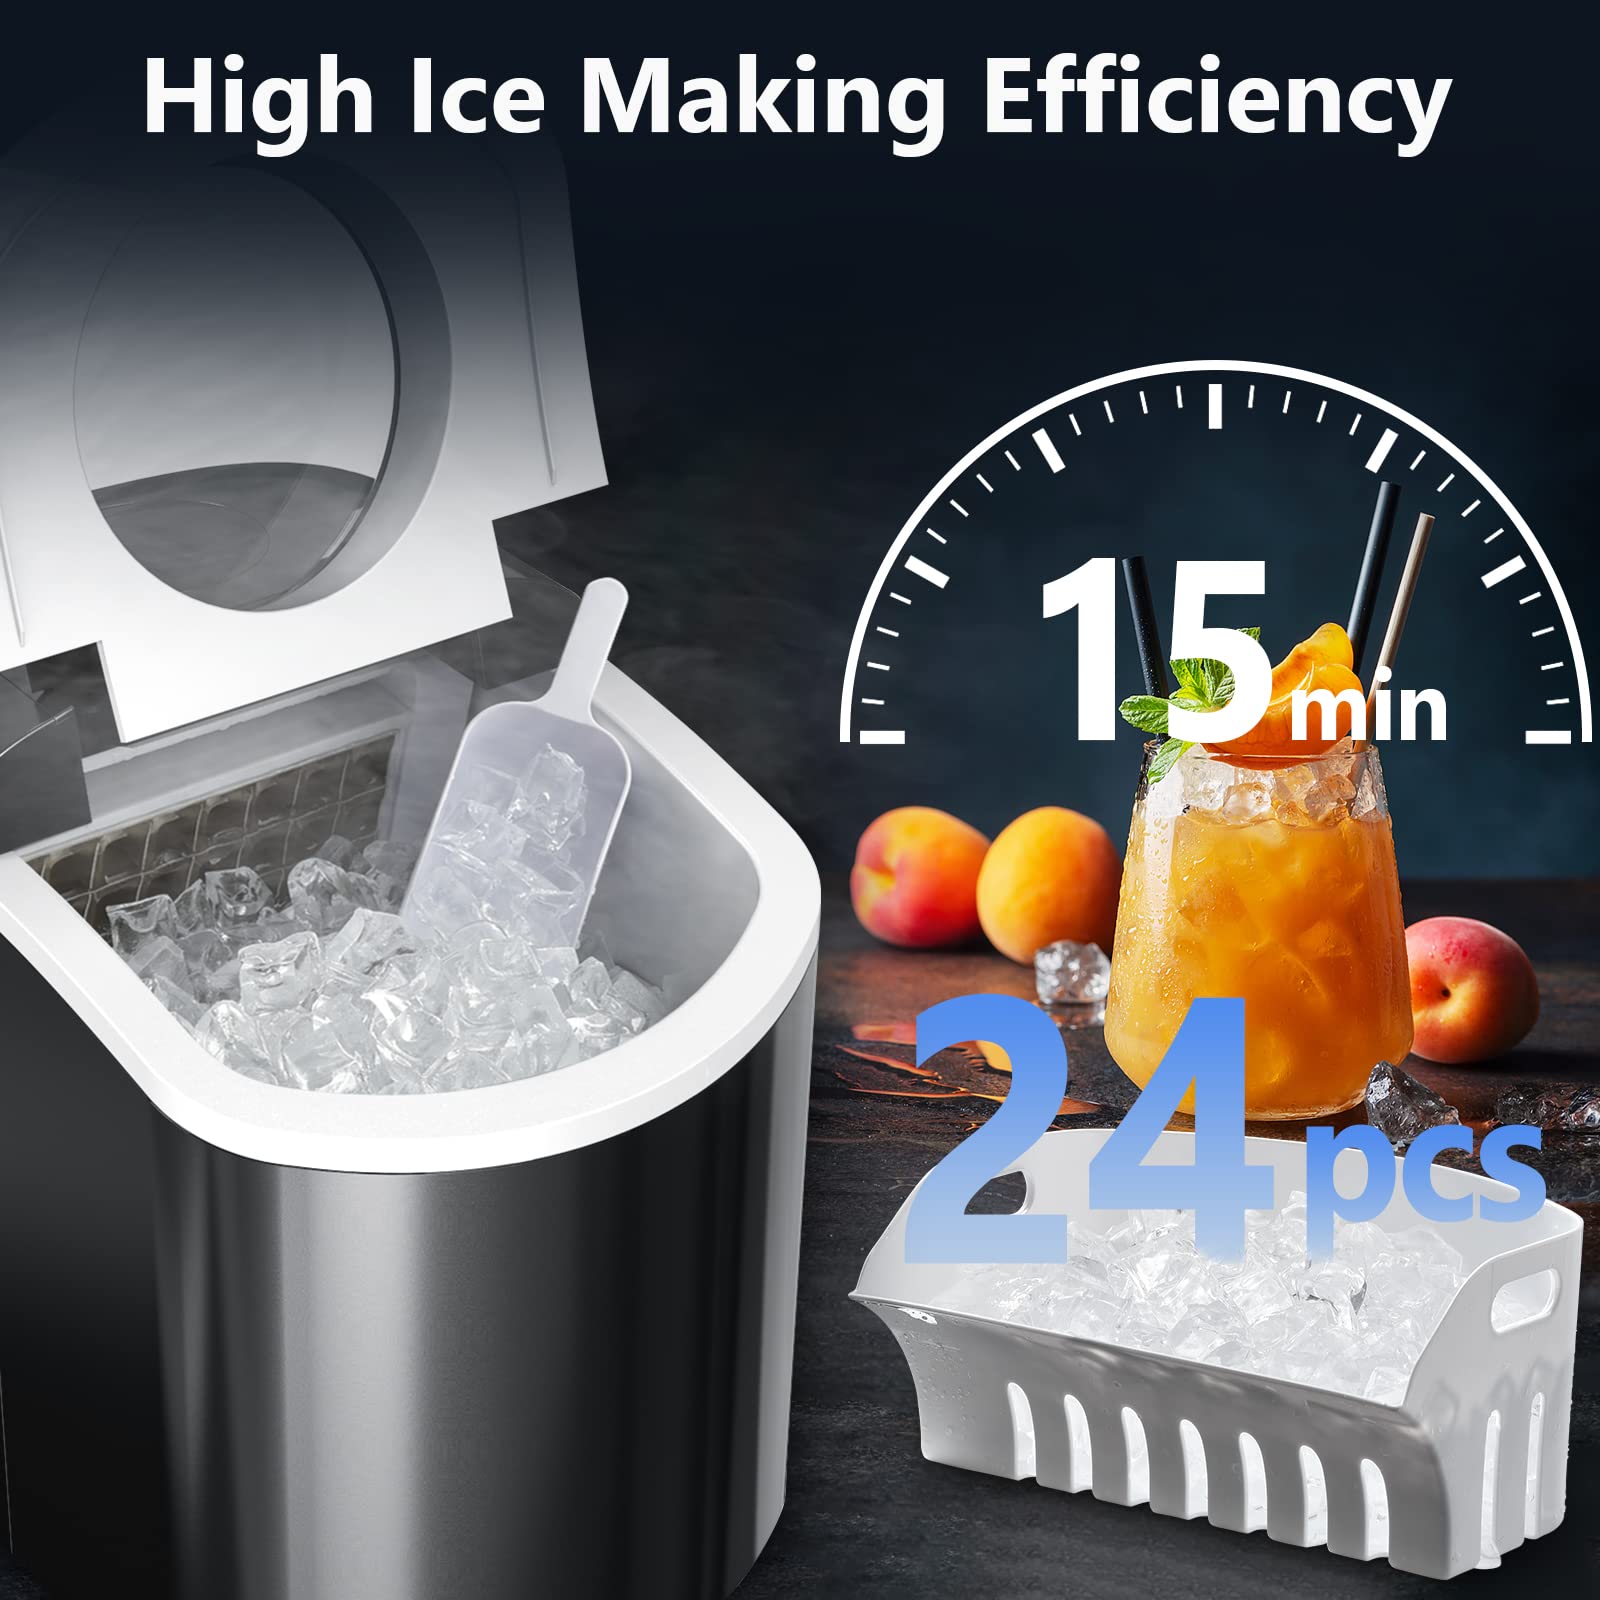 Ice Maker Machine for Countertop - Portable Ice Cube Maker delivers 24 Ice Cubes in 15 Min, 33Lbs/24H, Self-Cleaning, Ice Scoop & Basket, LCD Display, Visible Window, for Home Use/Party/Camping, Black